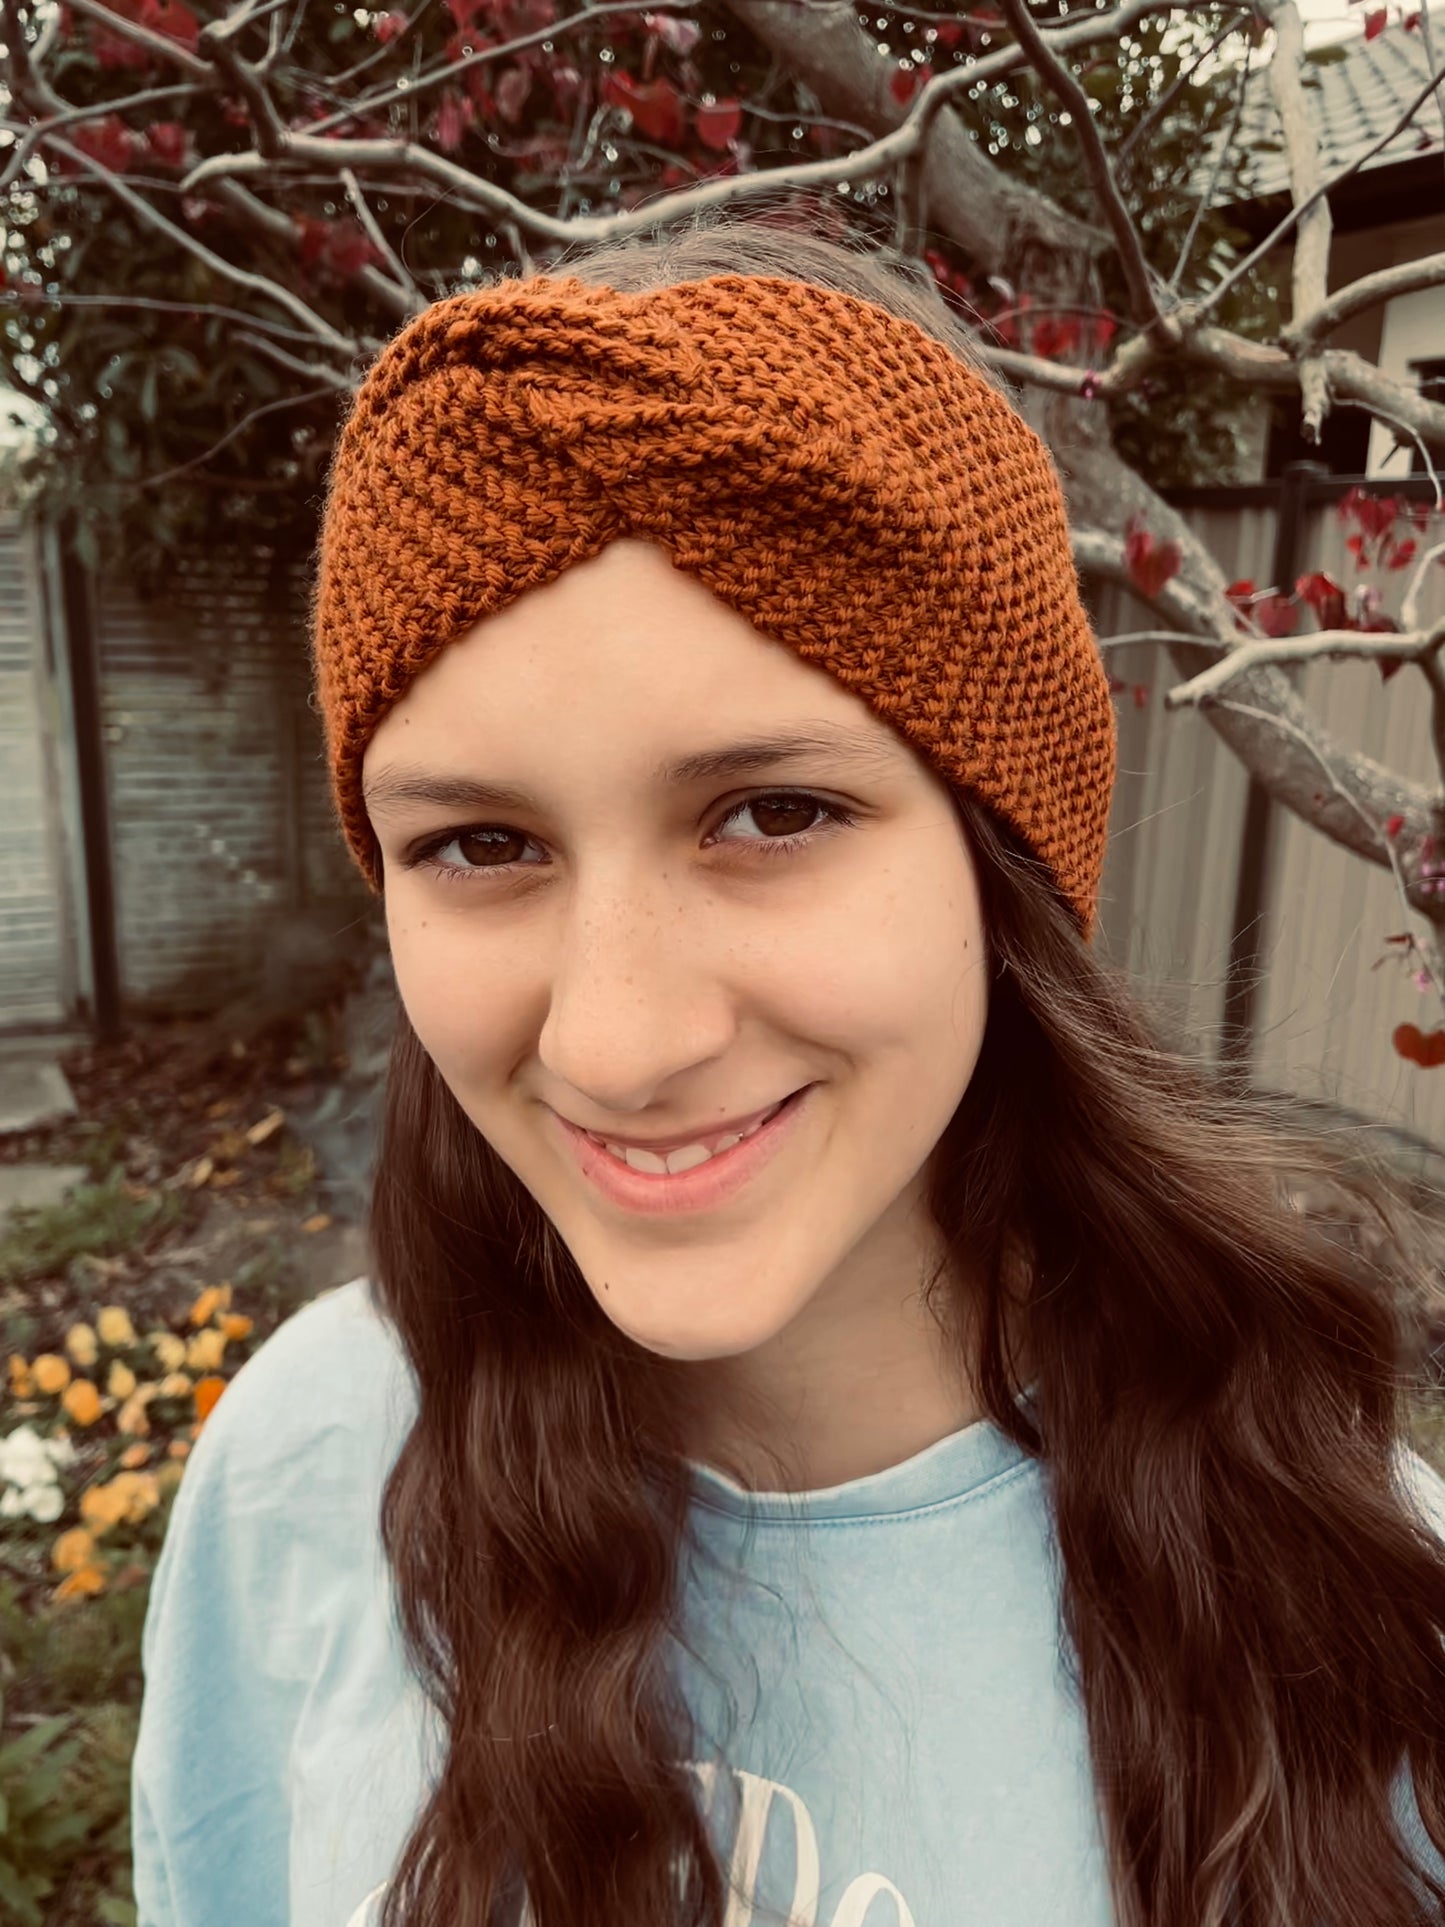 Learn to Knit - Beginner Workshop – The Knit Nook